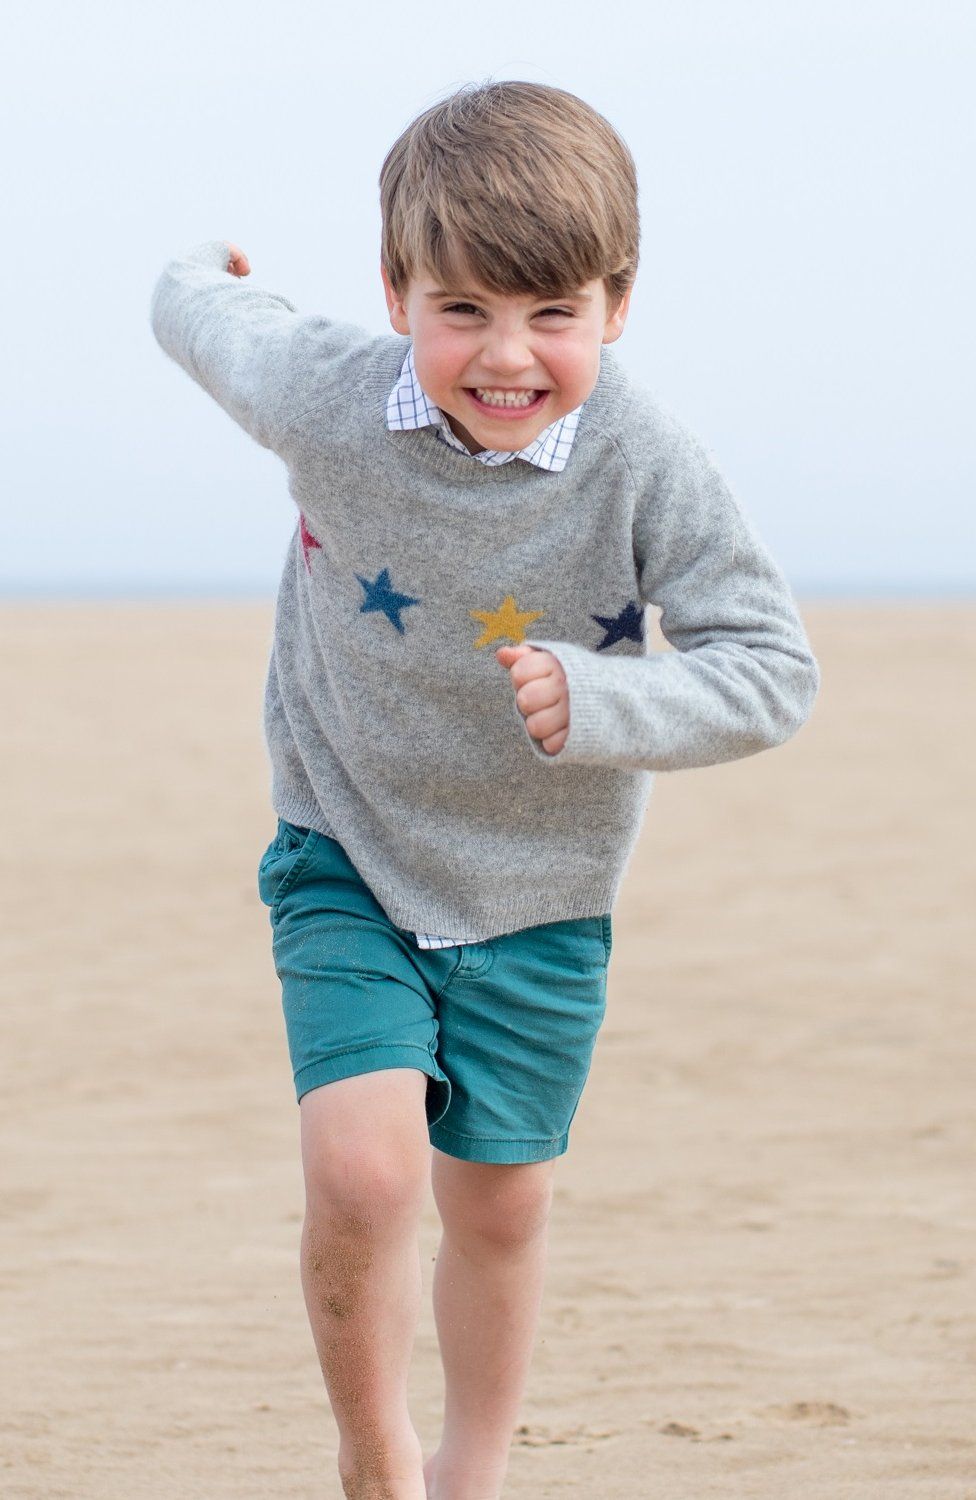 Prince Louis running on the beach